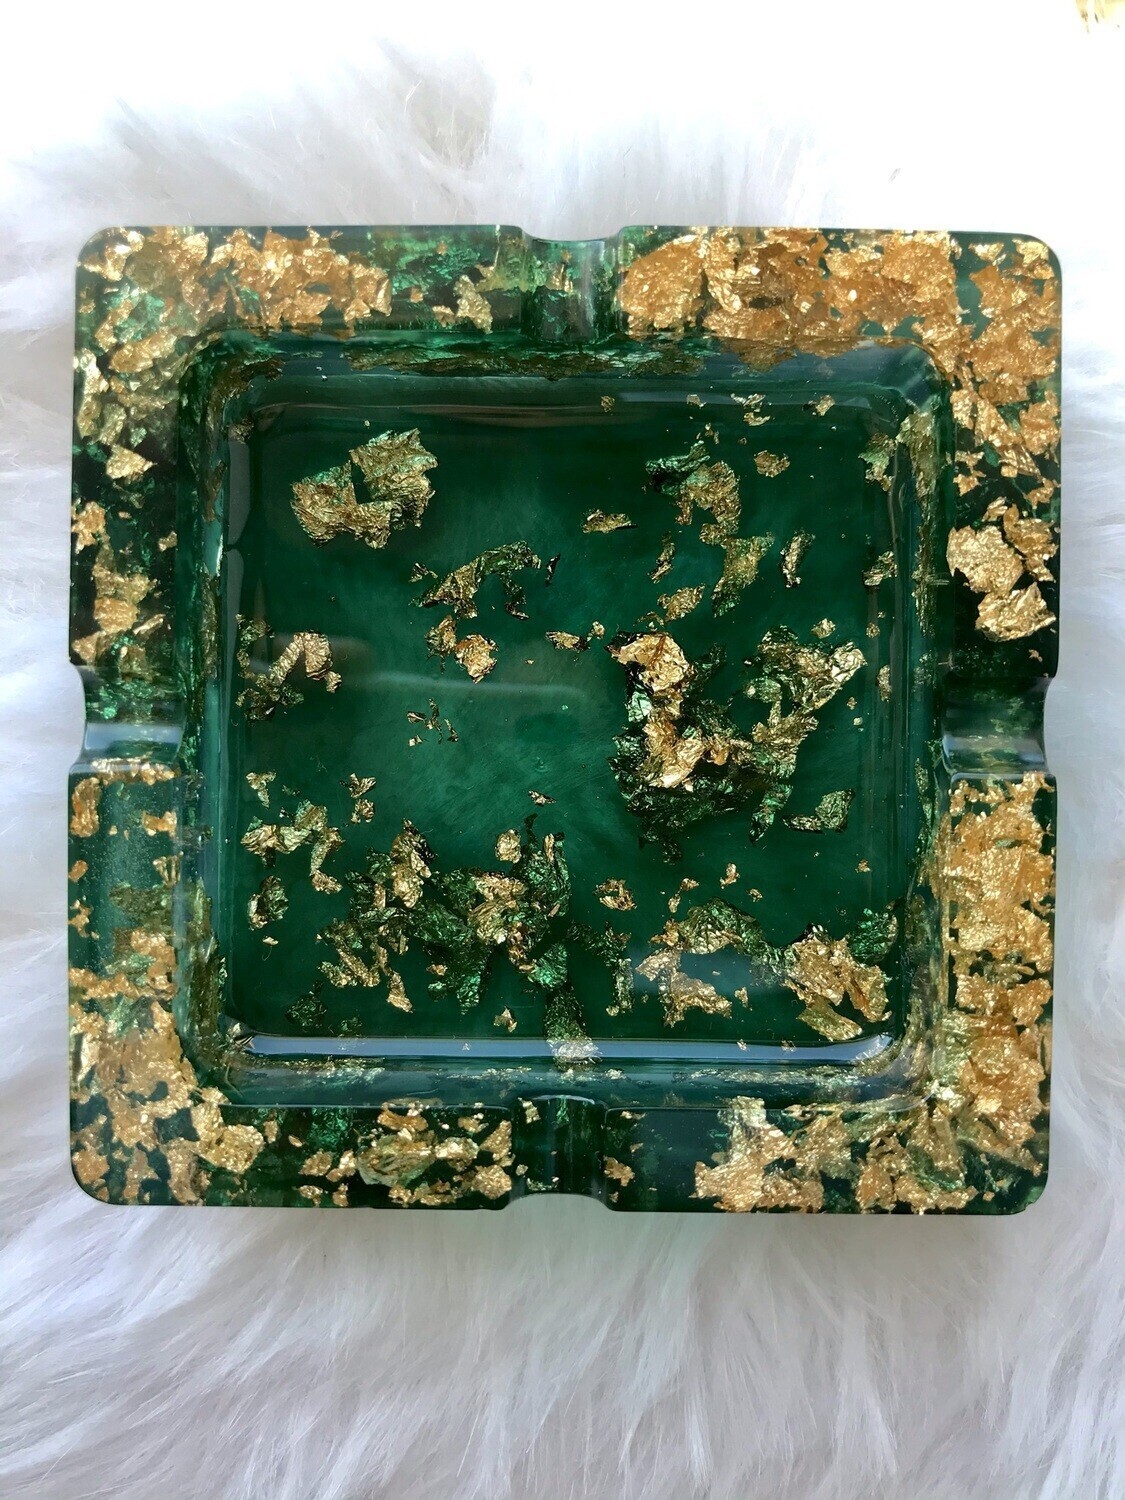 Emerald Green and Gold Ashtray